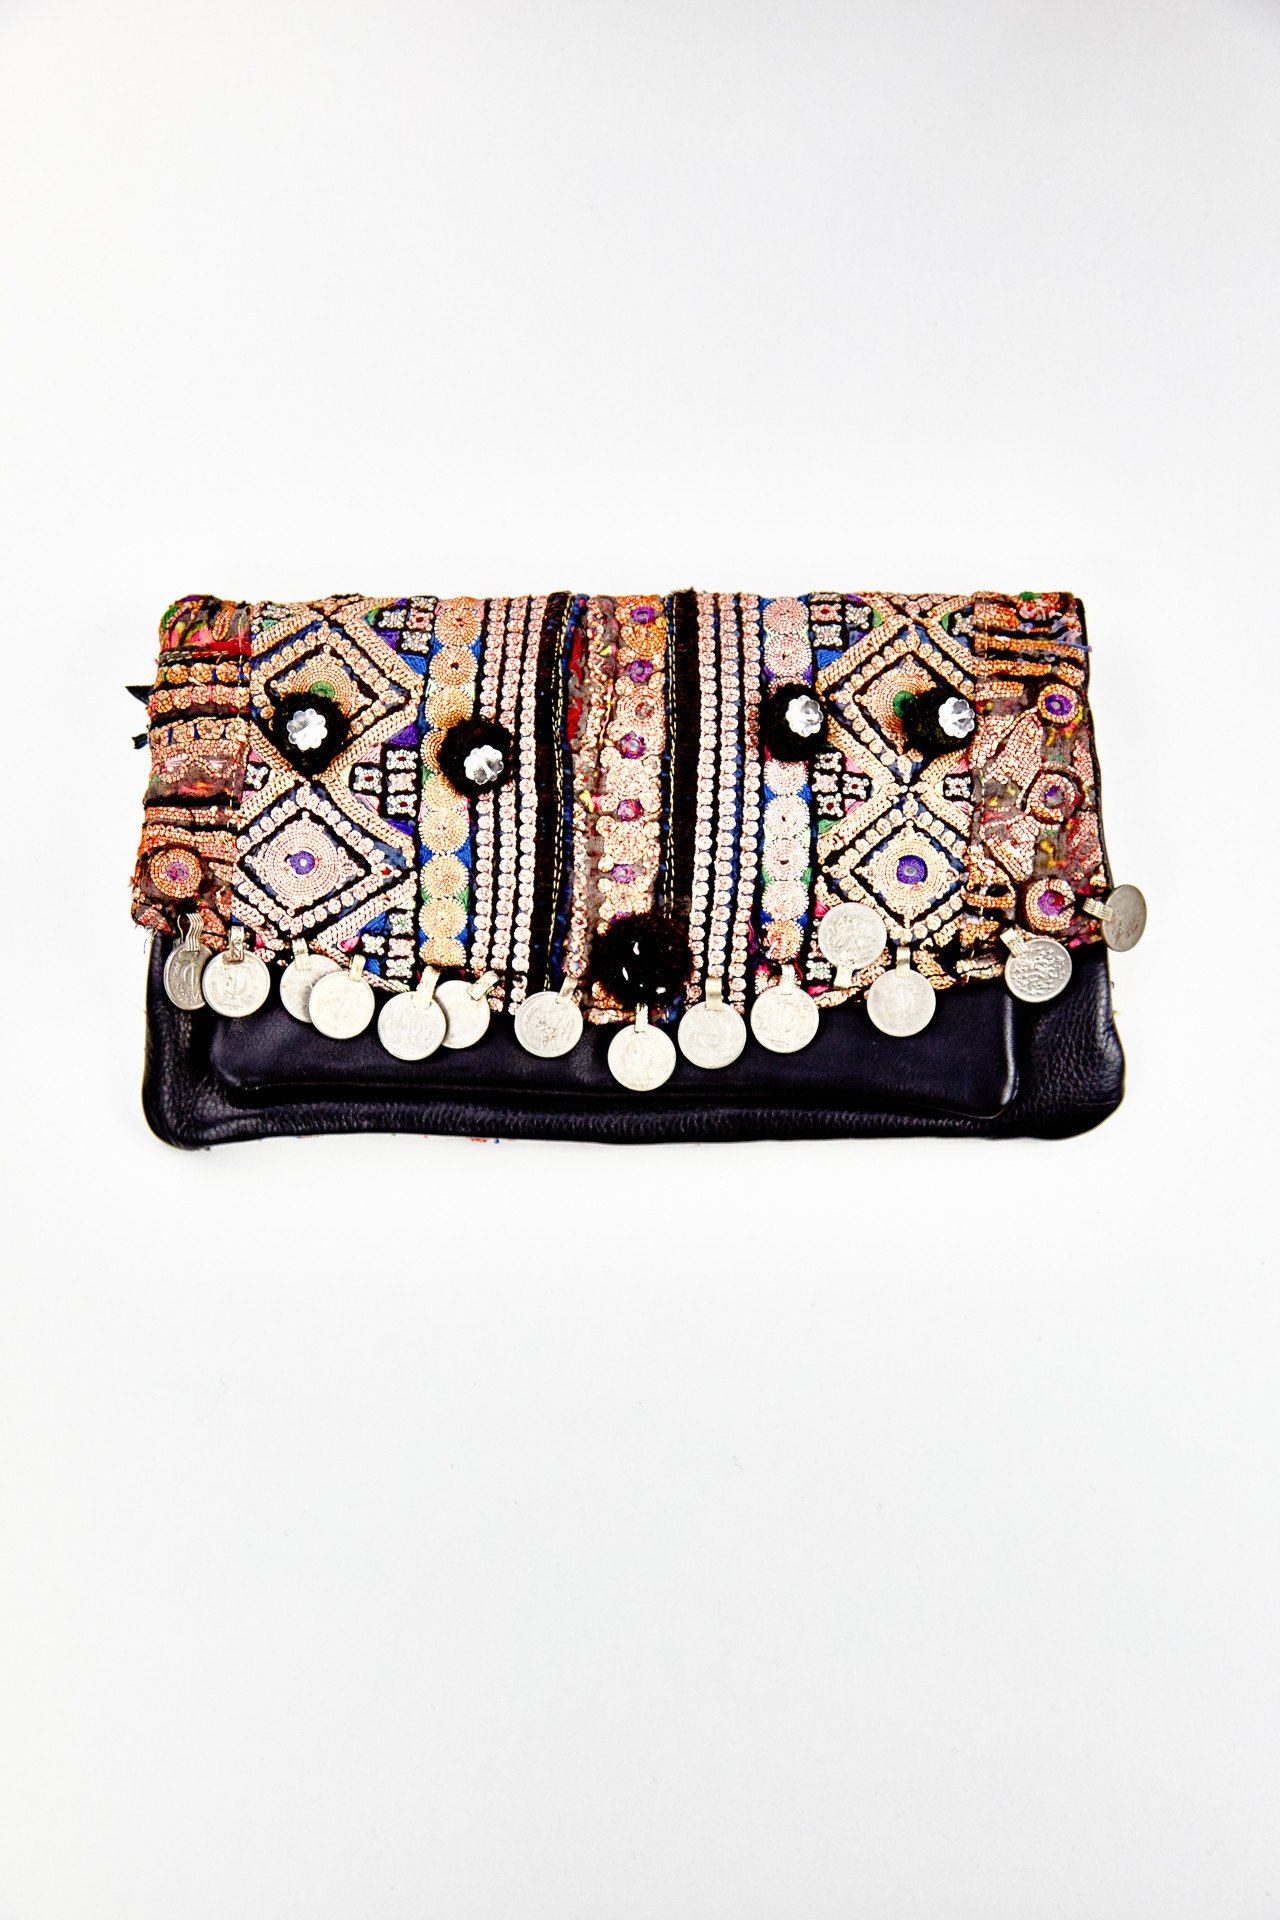 Jetsetbohemian Bags Mixed Colours Coin Tassel Clutch